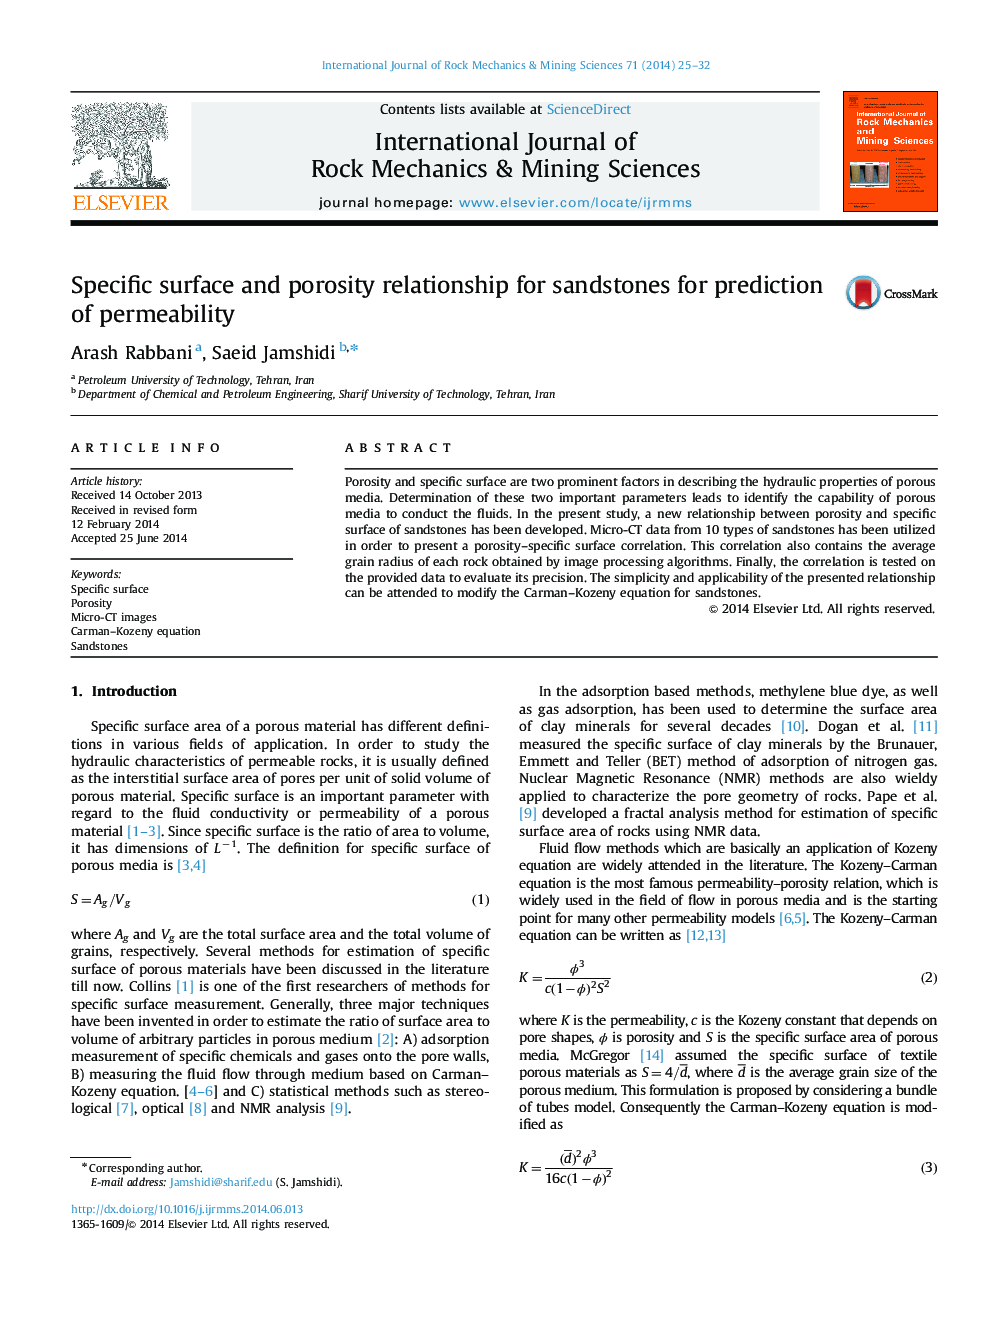 Specific surface and porosity relationship for sandstones for prediction of permeability